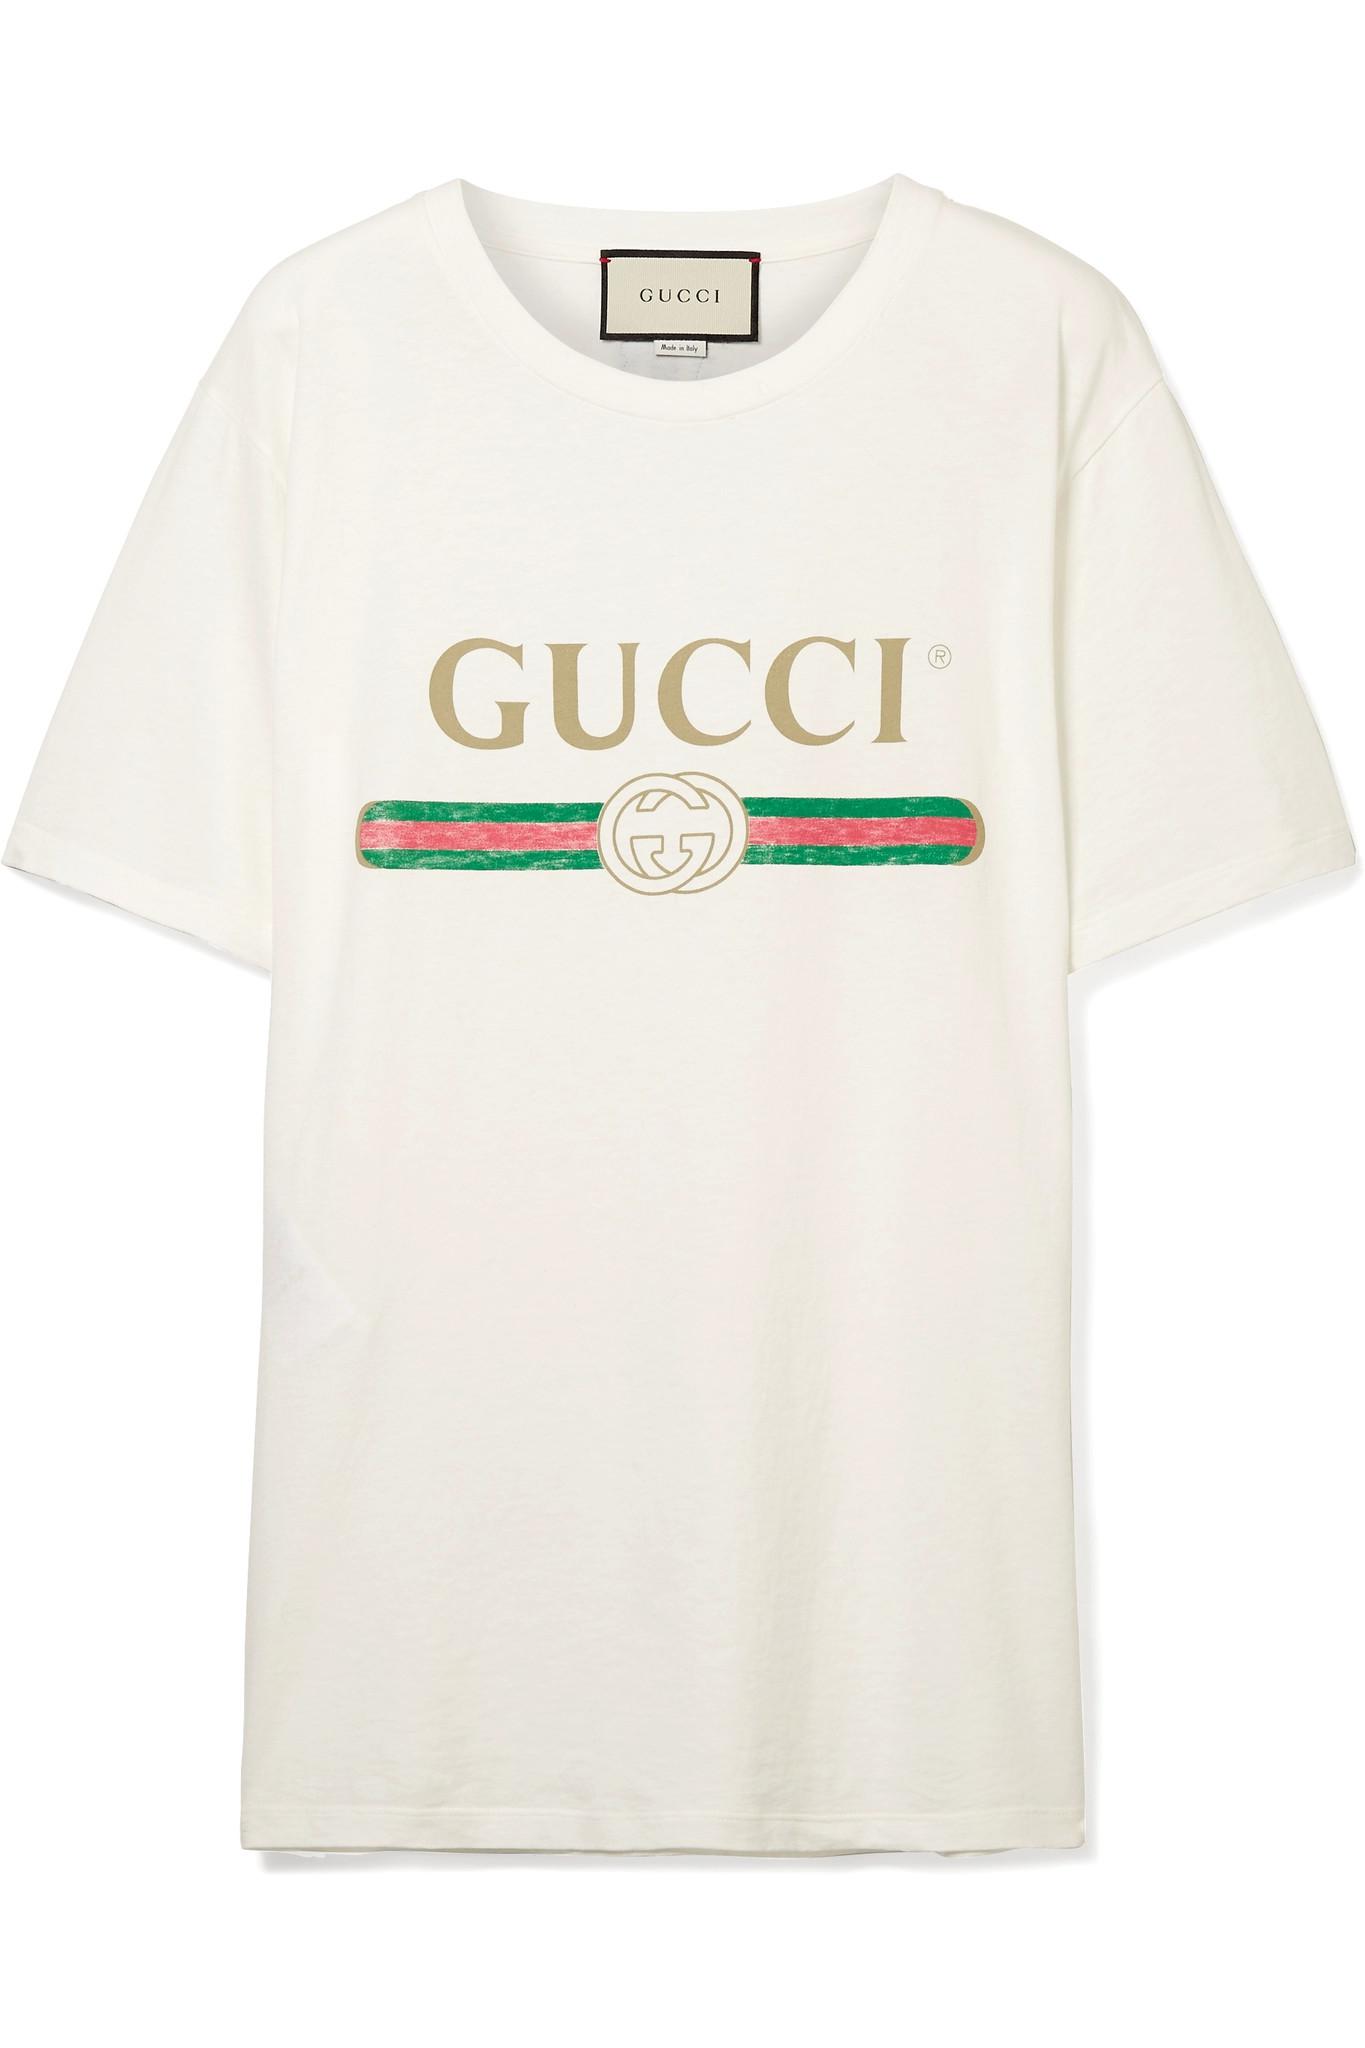 Gucci Appliquéd Distressed Printed Cotton-jersey T-shirt in Cream